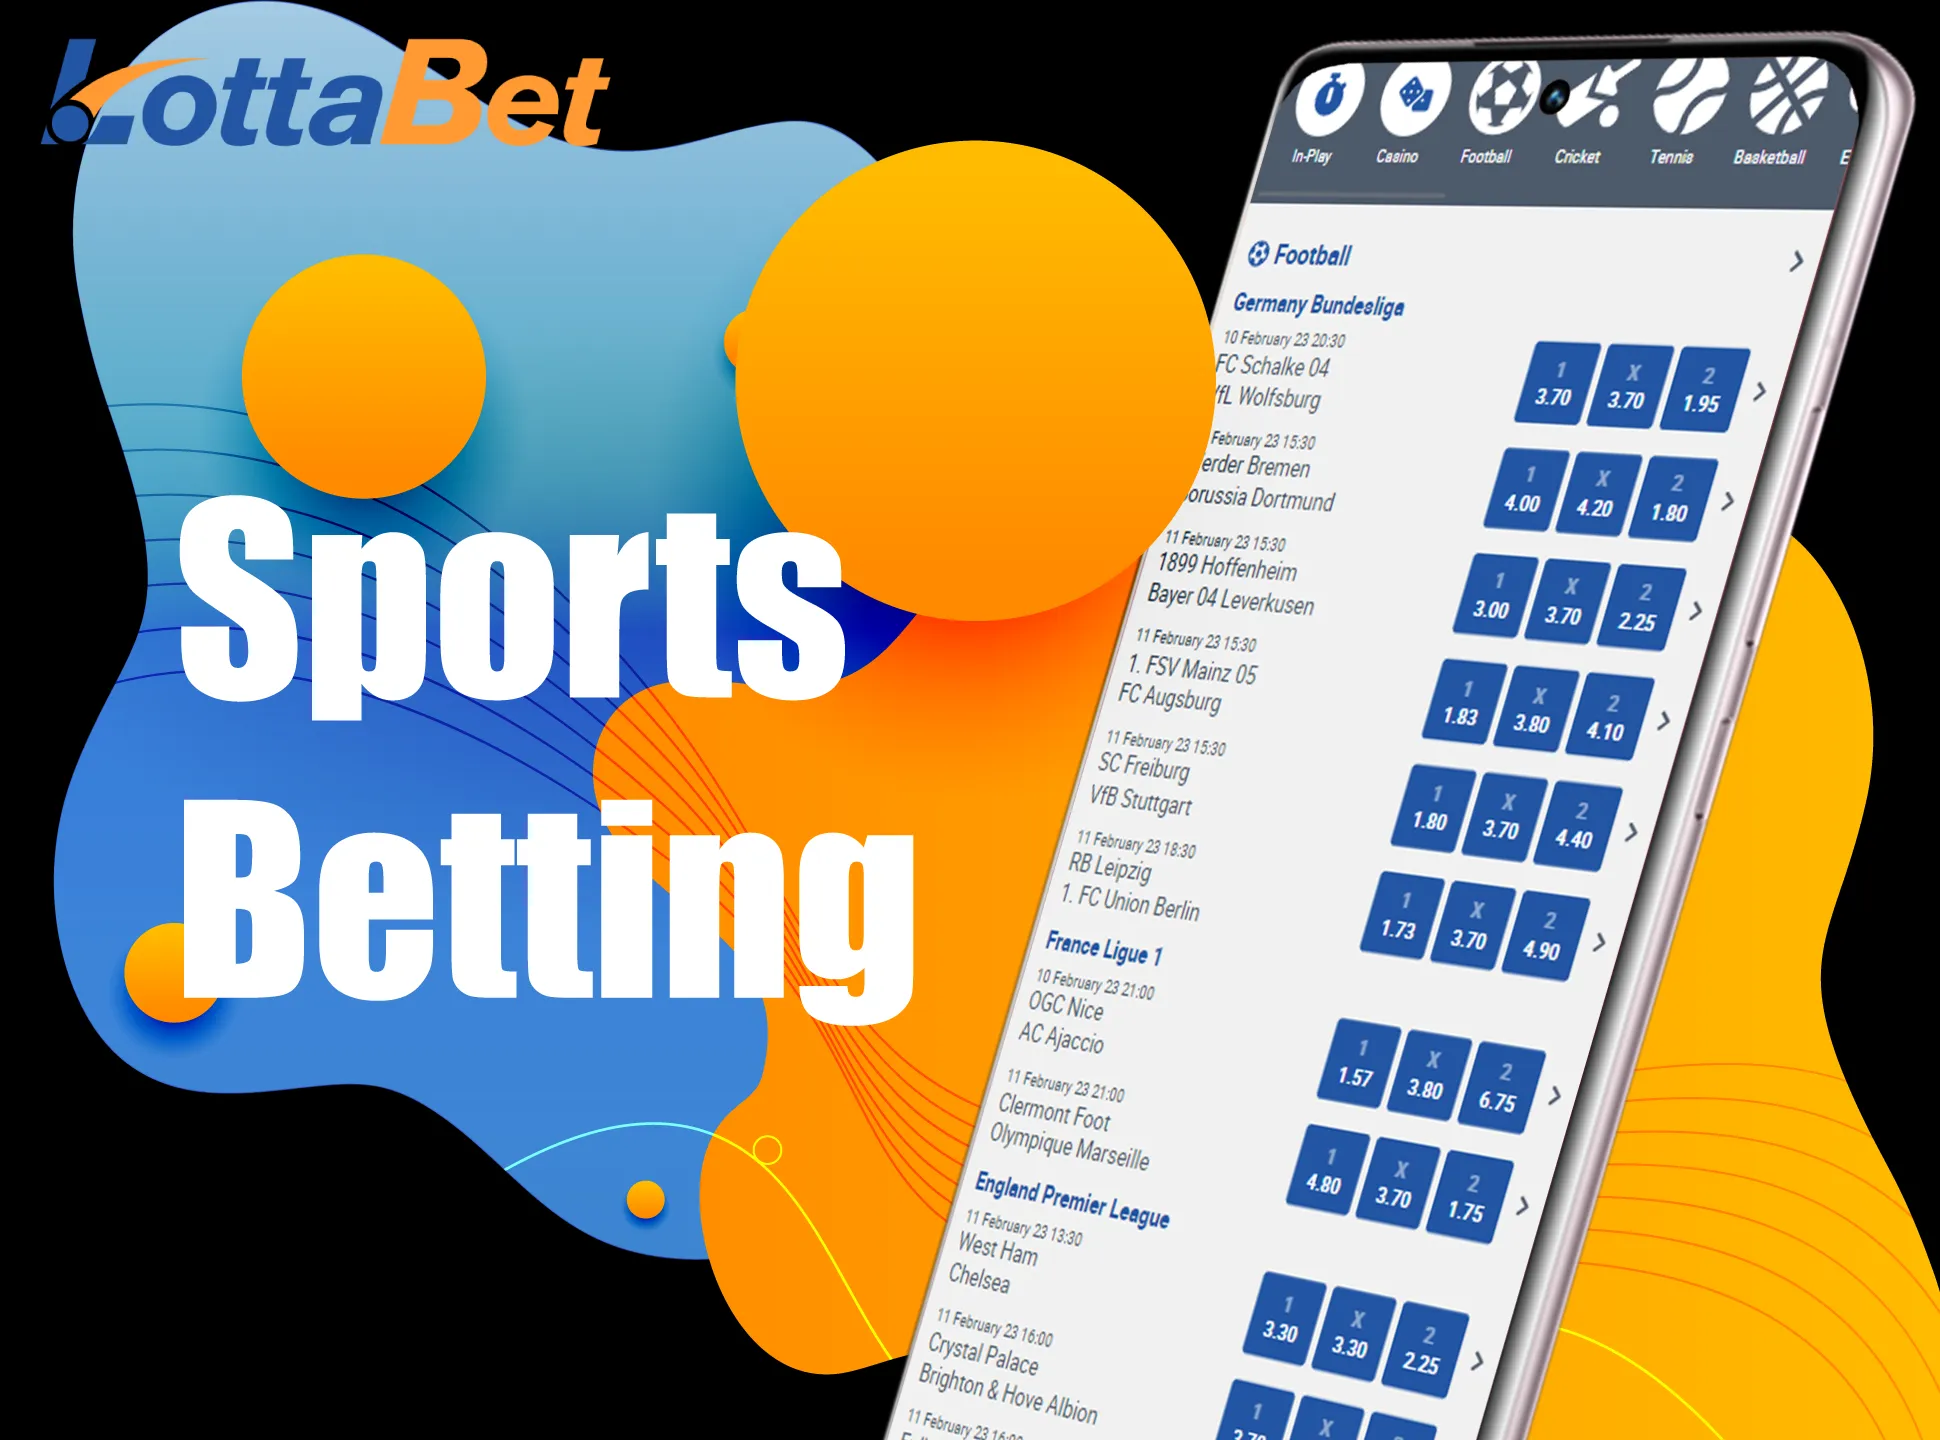 Go to the betting section of Lottabet to start betting on sports.